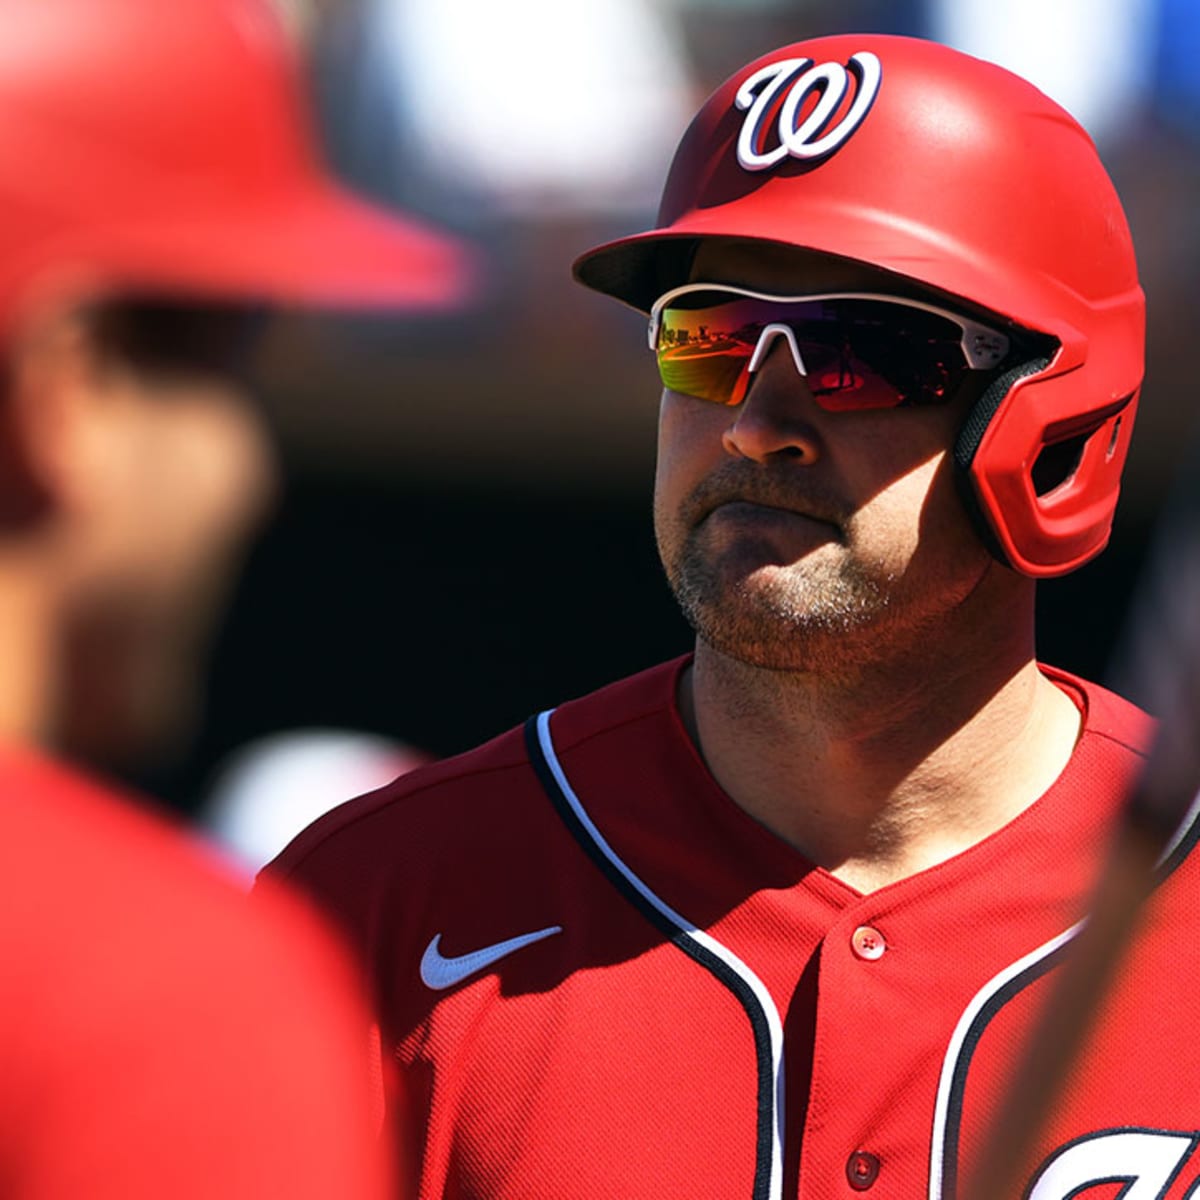 Nationals' Zimmerman and Ross opting out of MLB season